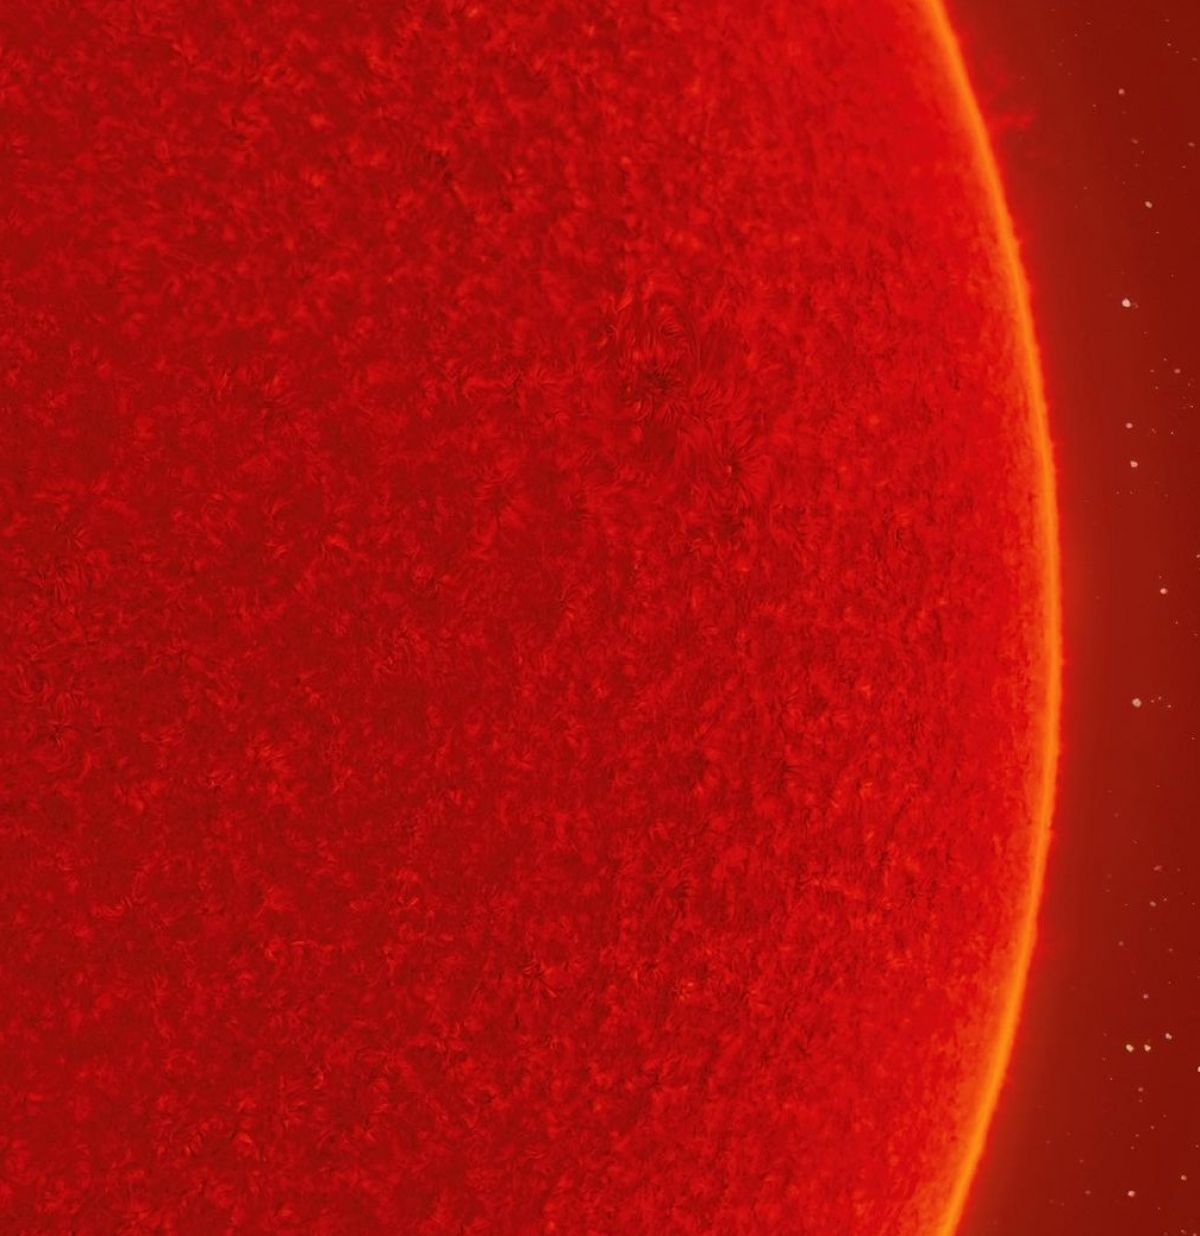 230 megapixel photo of the Sun from US photographer #3